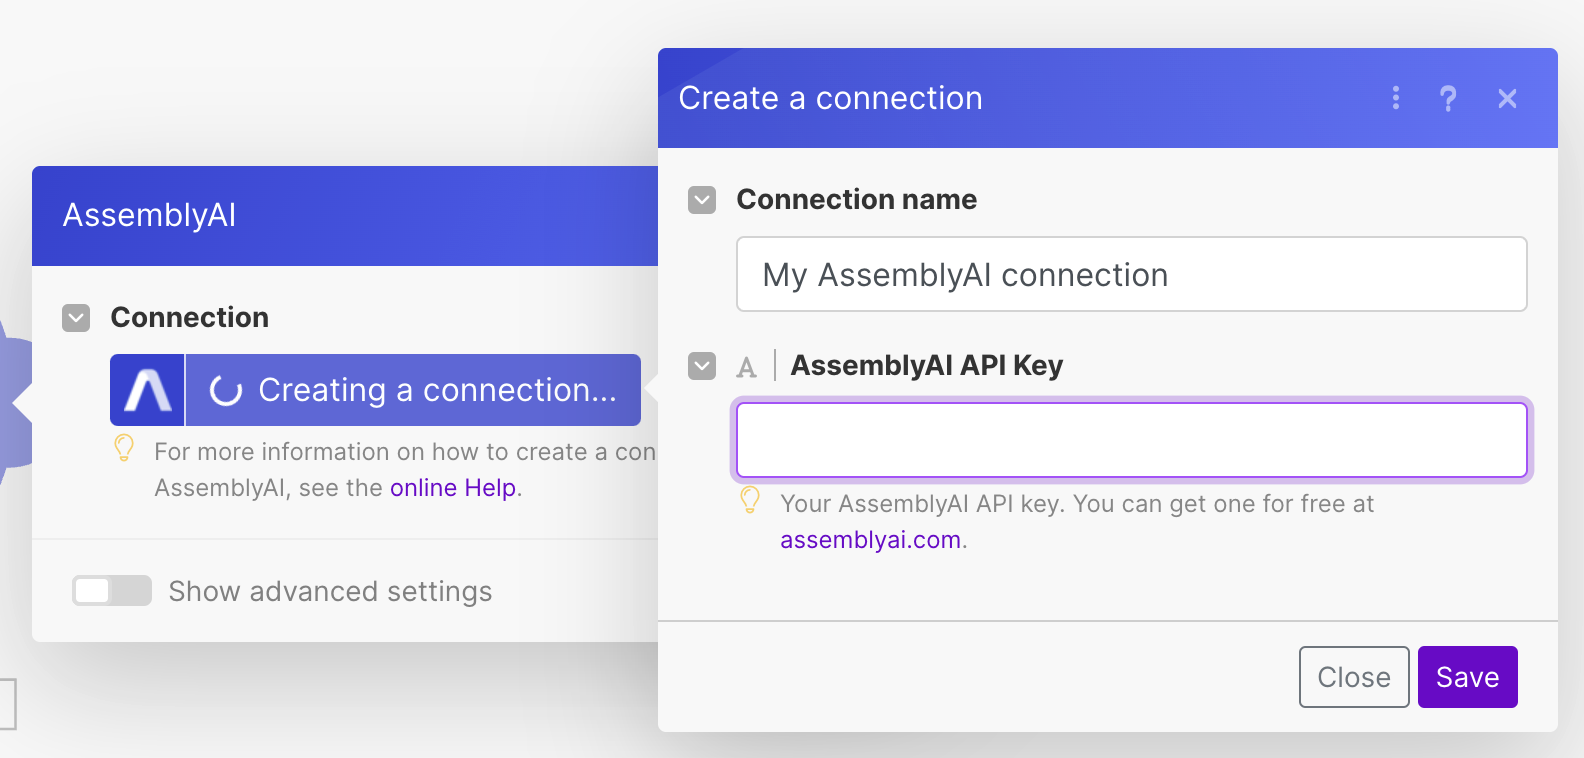 Create a connection to AssemblyAI in Make